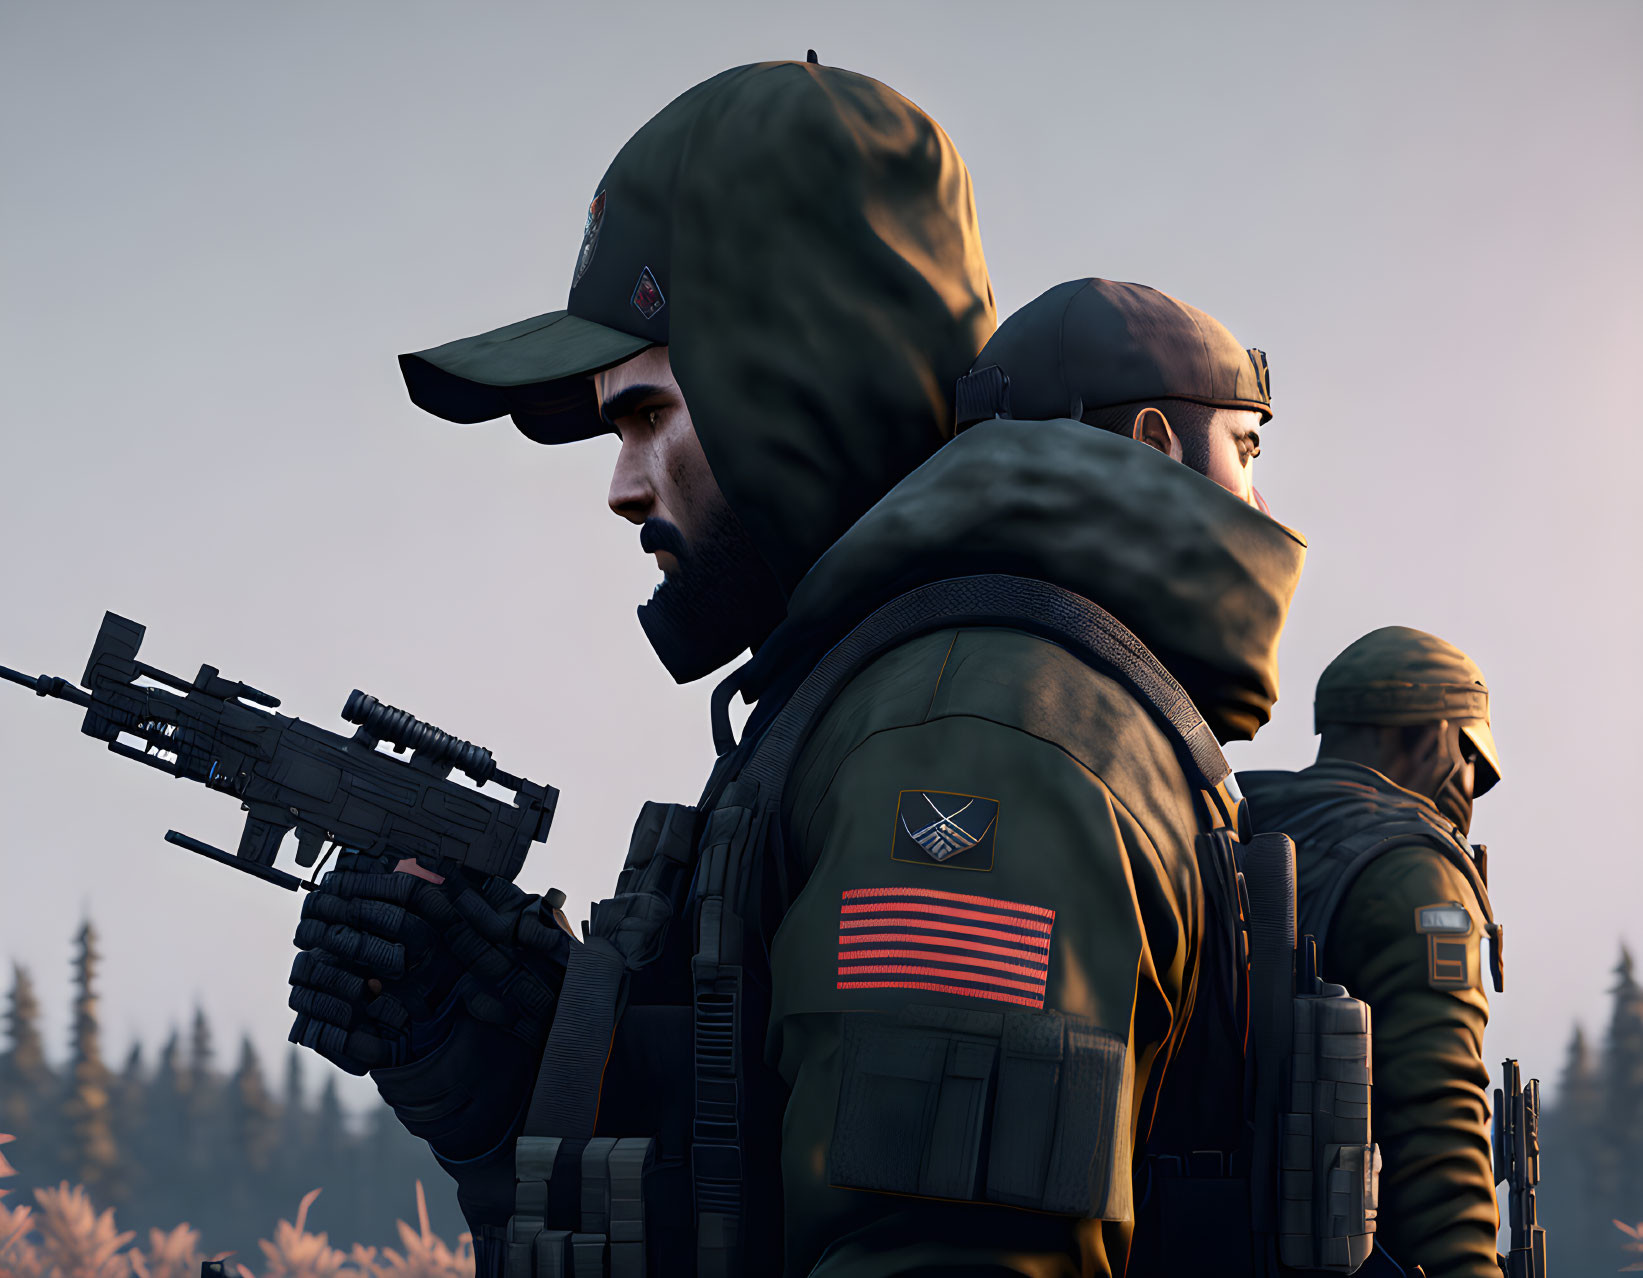 Three armed figures in tactical gear with hoodies and caps, one in profile with an American flag.